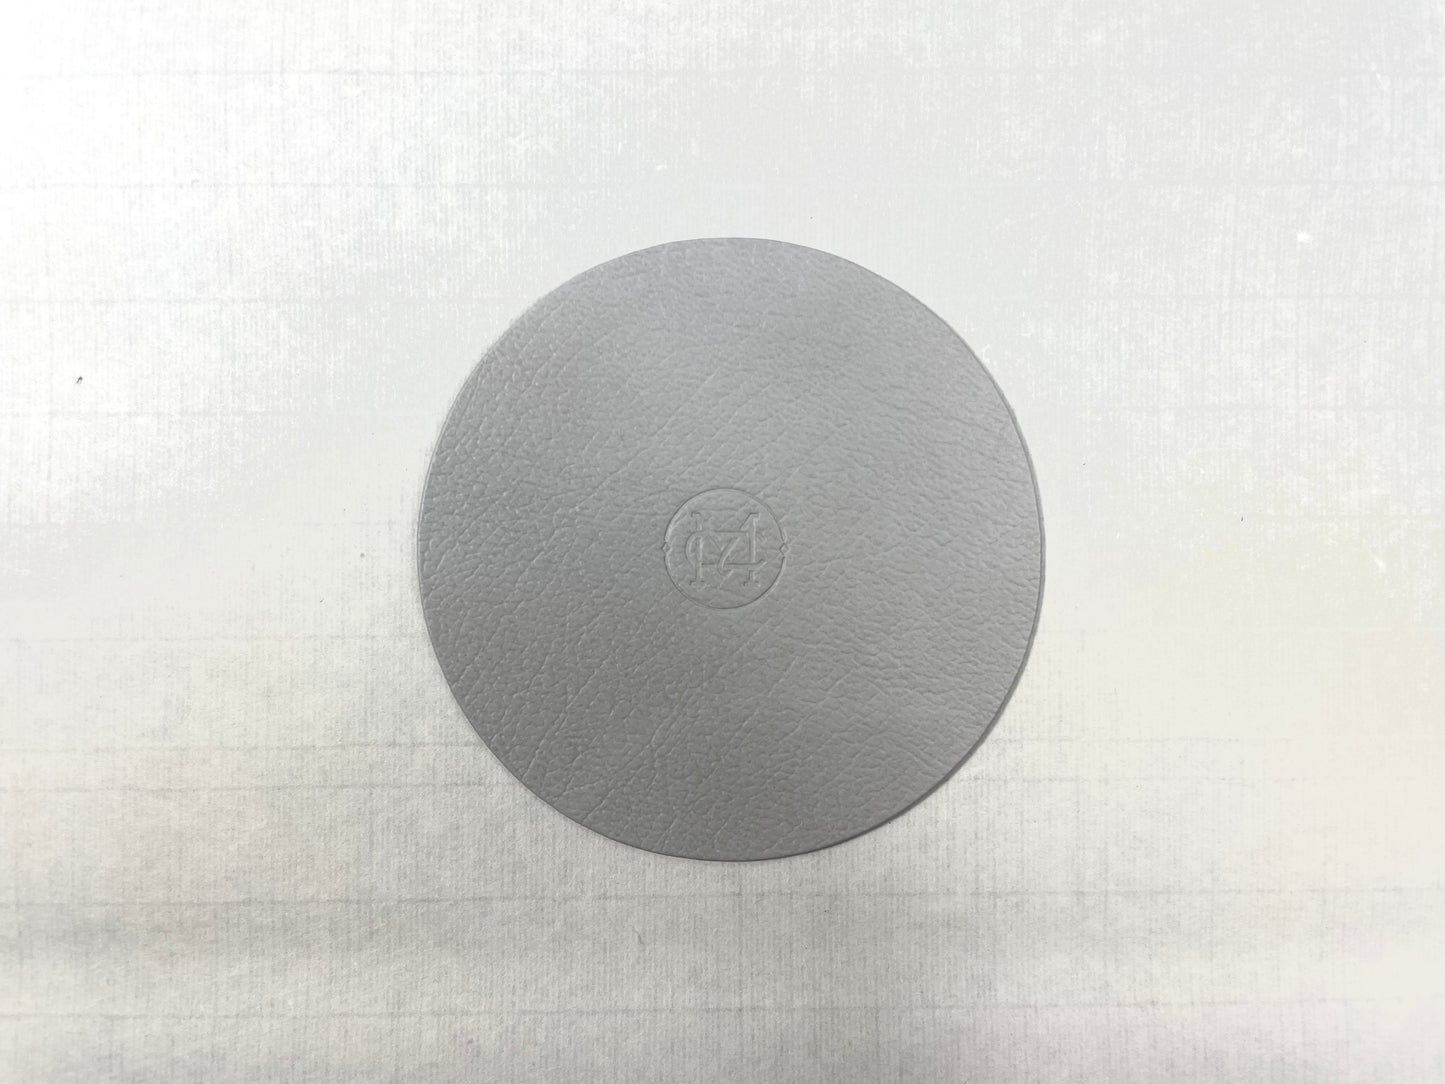 Mercury Round/Square Coaster Recycled Leather